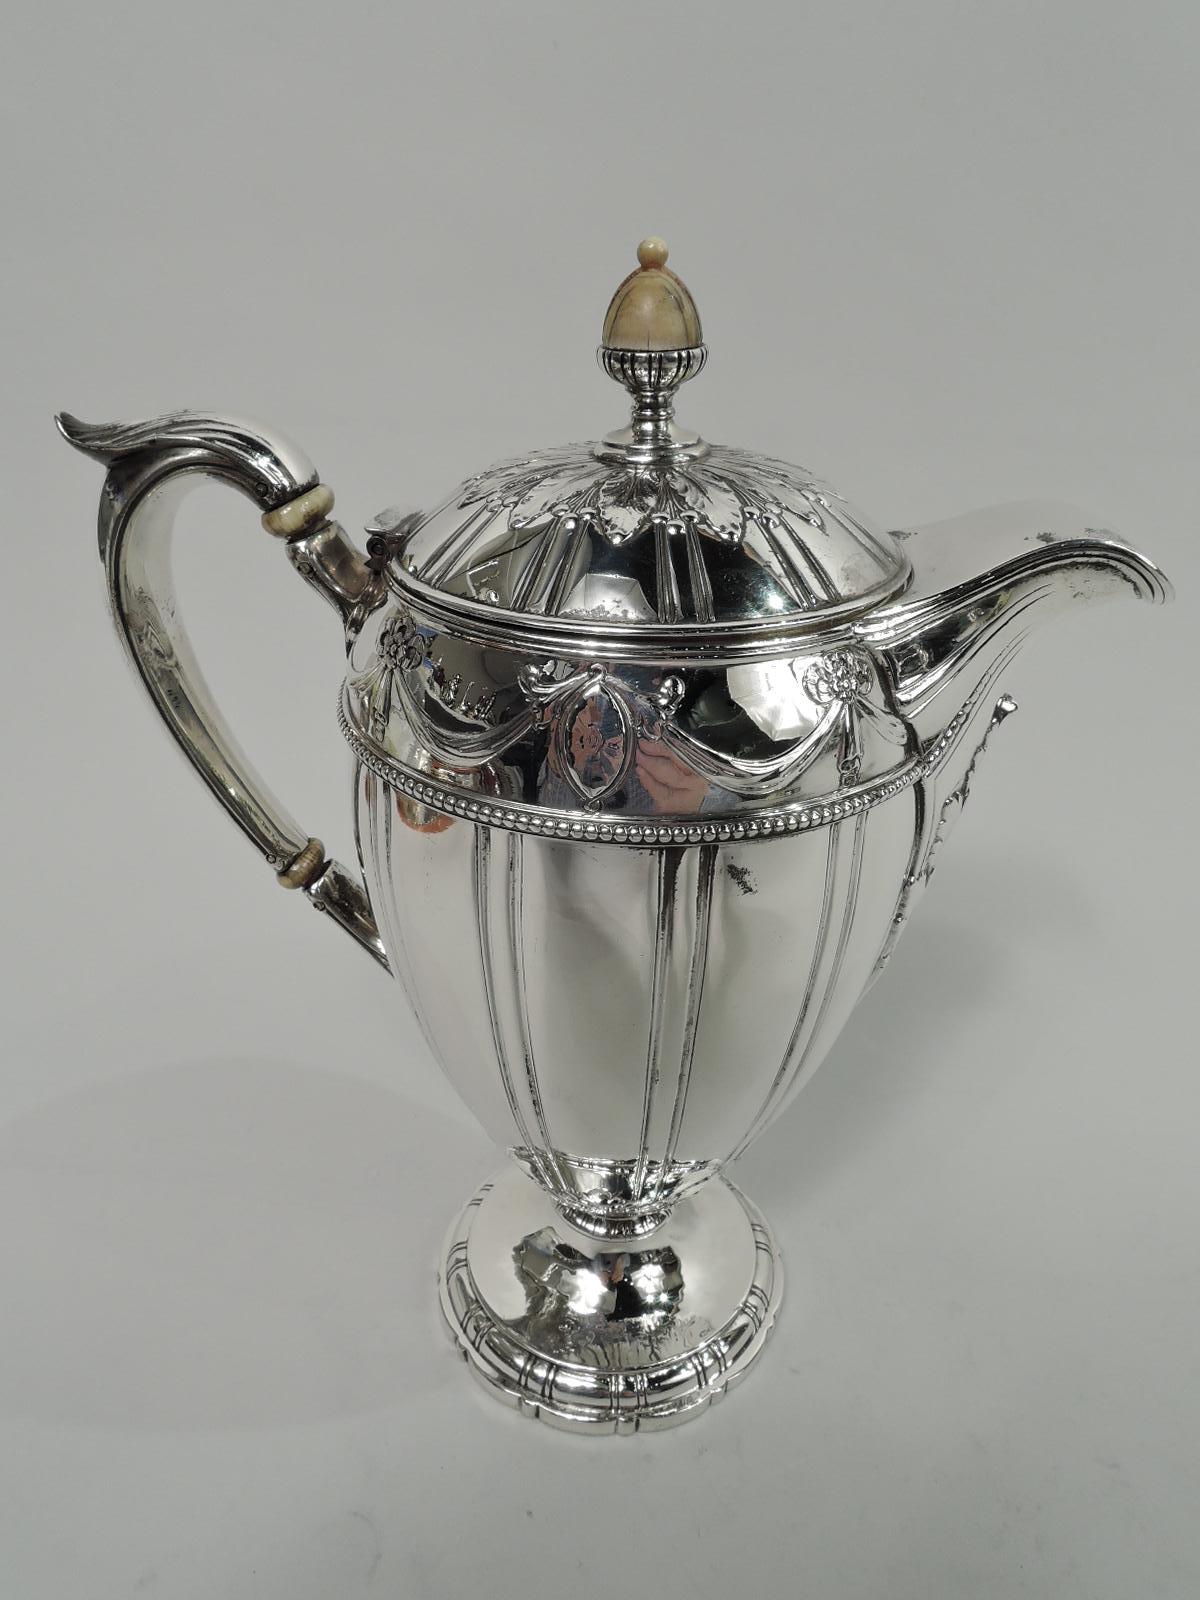 Edwardian Regency sterling silver coffeepot. Made by Gorham in Providence, ca 1910. Ovoid body, raised and hinged cover with acorn finial, leaf-capped high looping handle, and raised and scalloped foot. Pilasters, beading, and bead and reel. Leaf